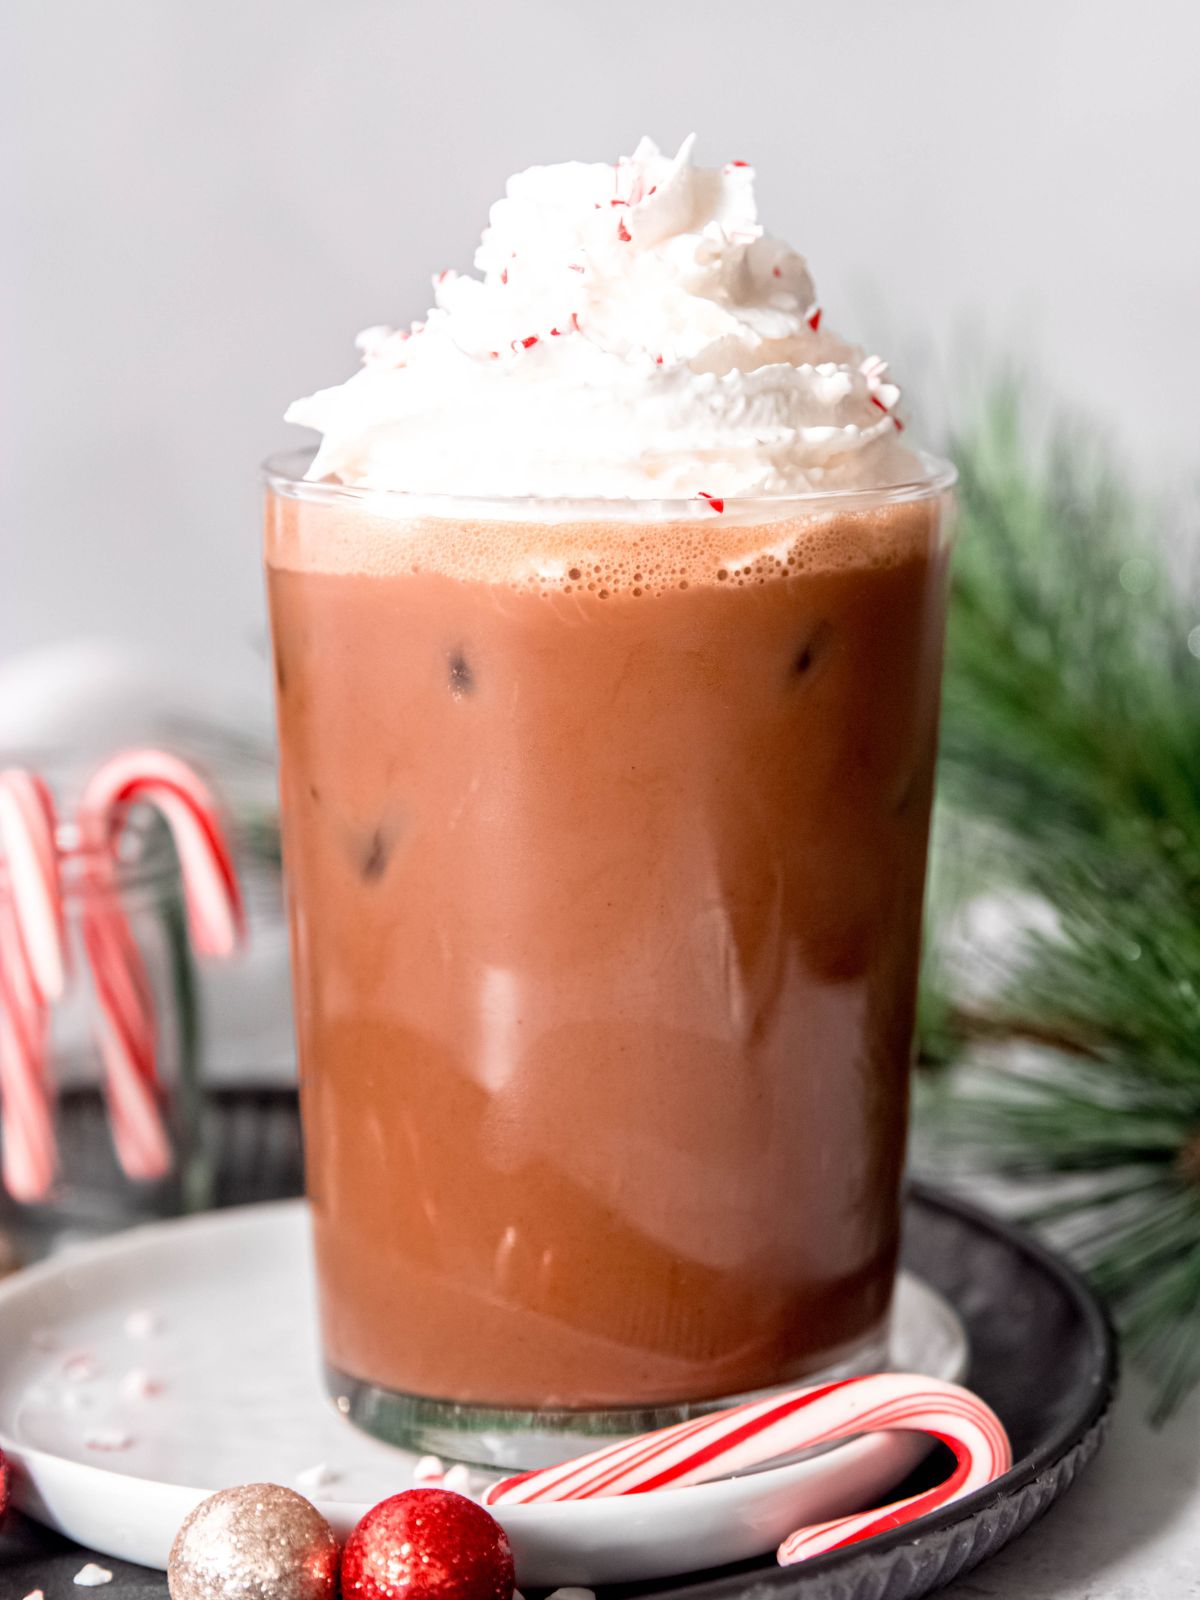 side on hero shot of an iced peppermint mocha topped with whipped cream and crushed peppermint candies a la Starbucks.